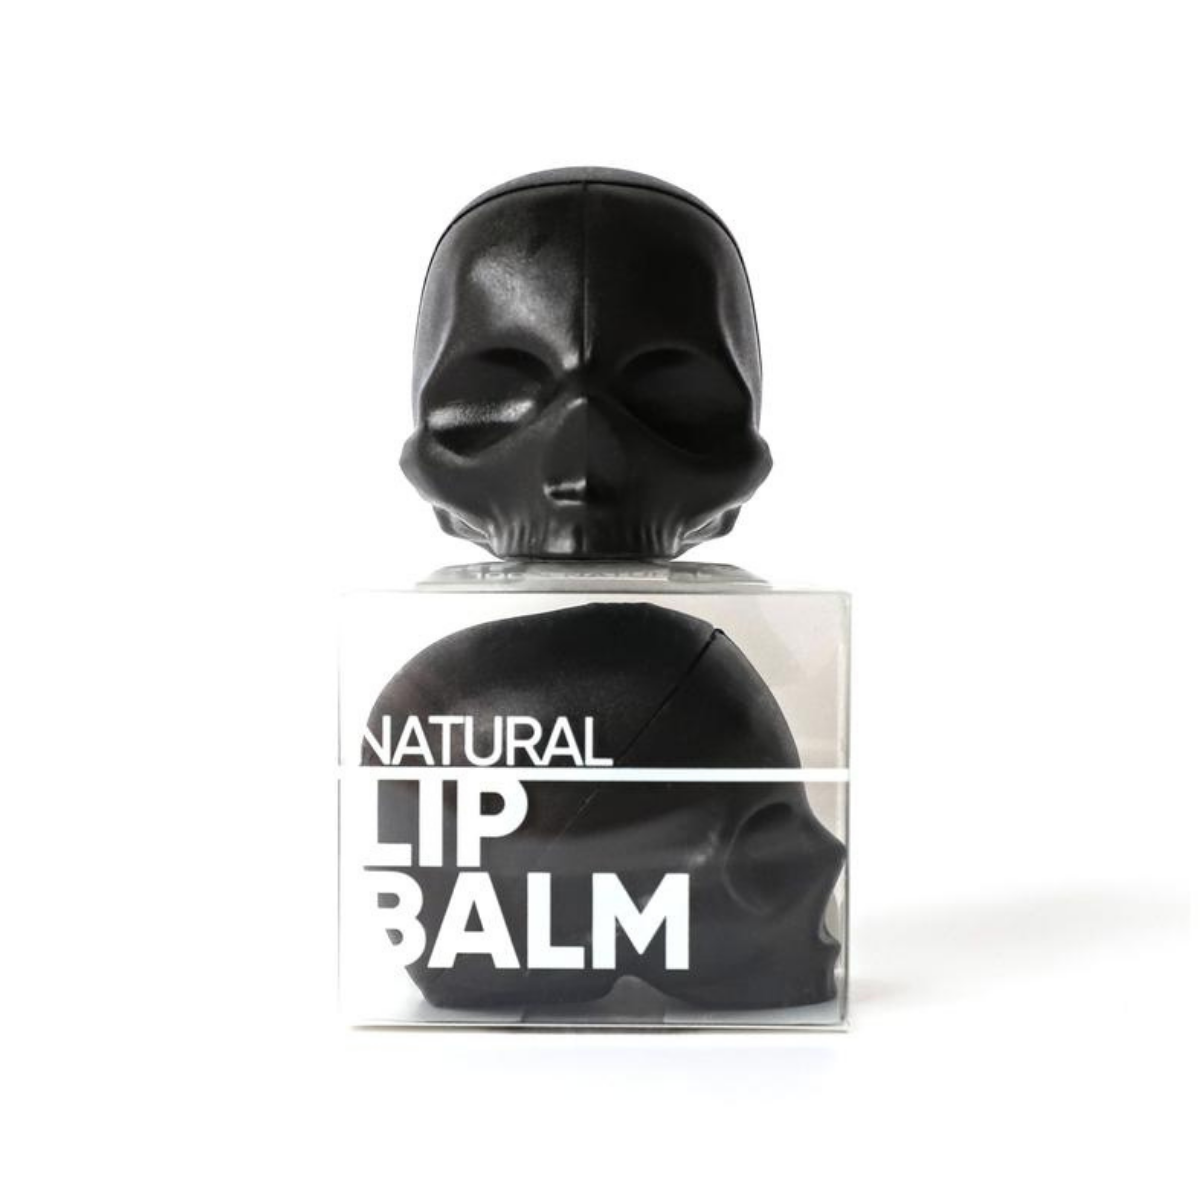 Primary image of Natural Lip Balm